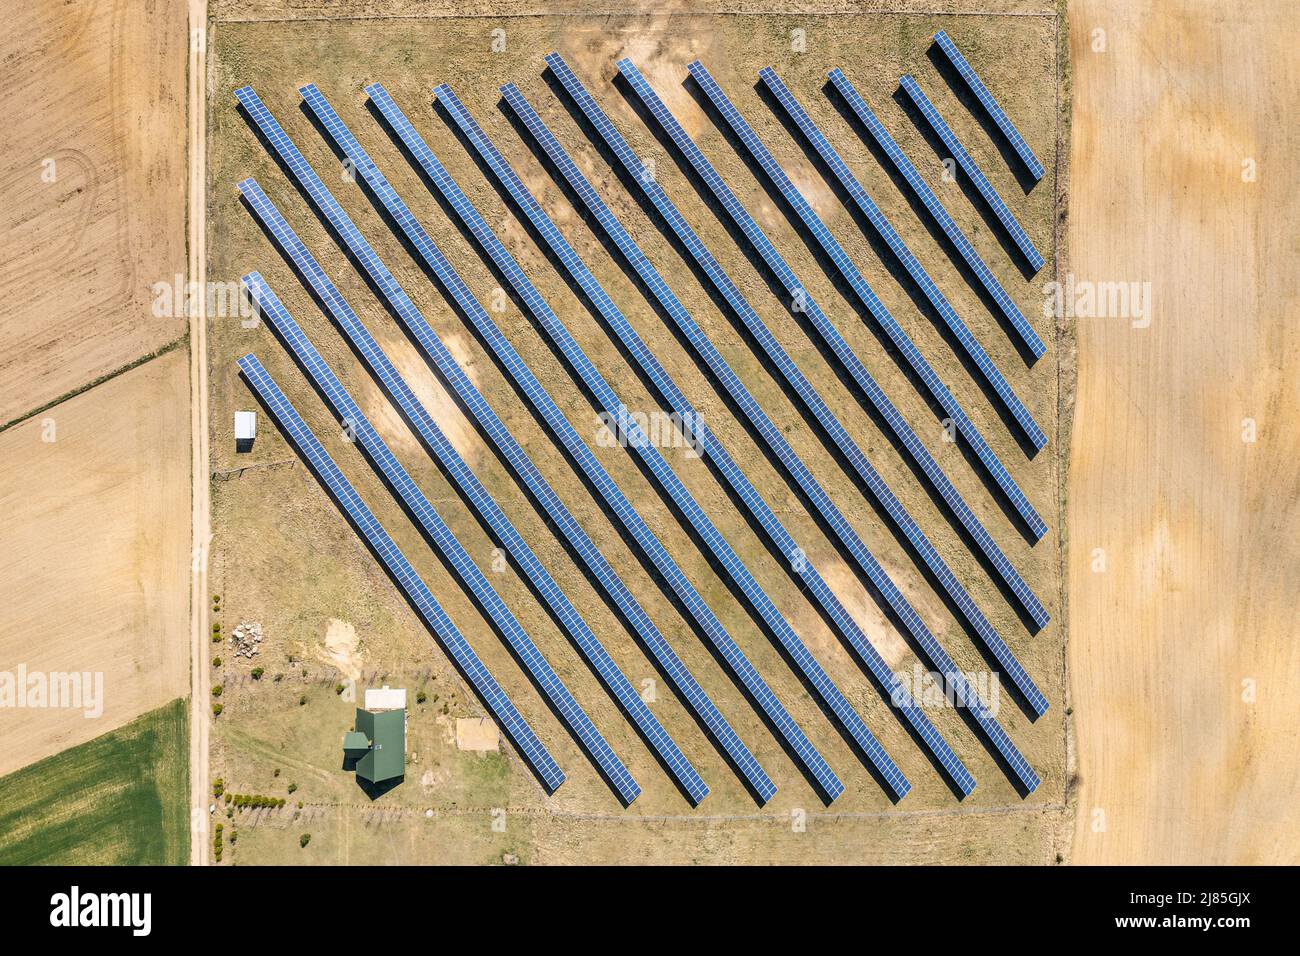 Solar farm aerial view, rows of PV panels by a small house Stock Photo